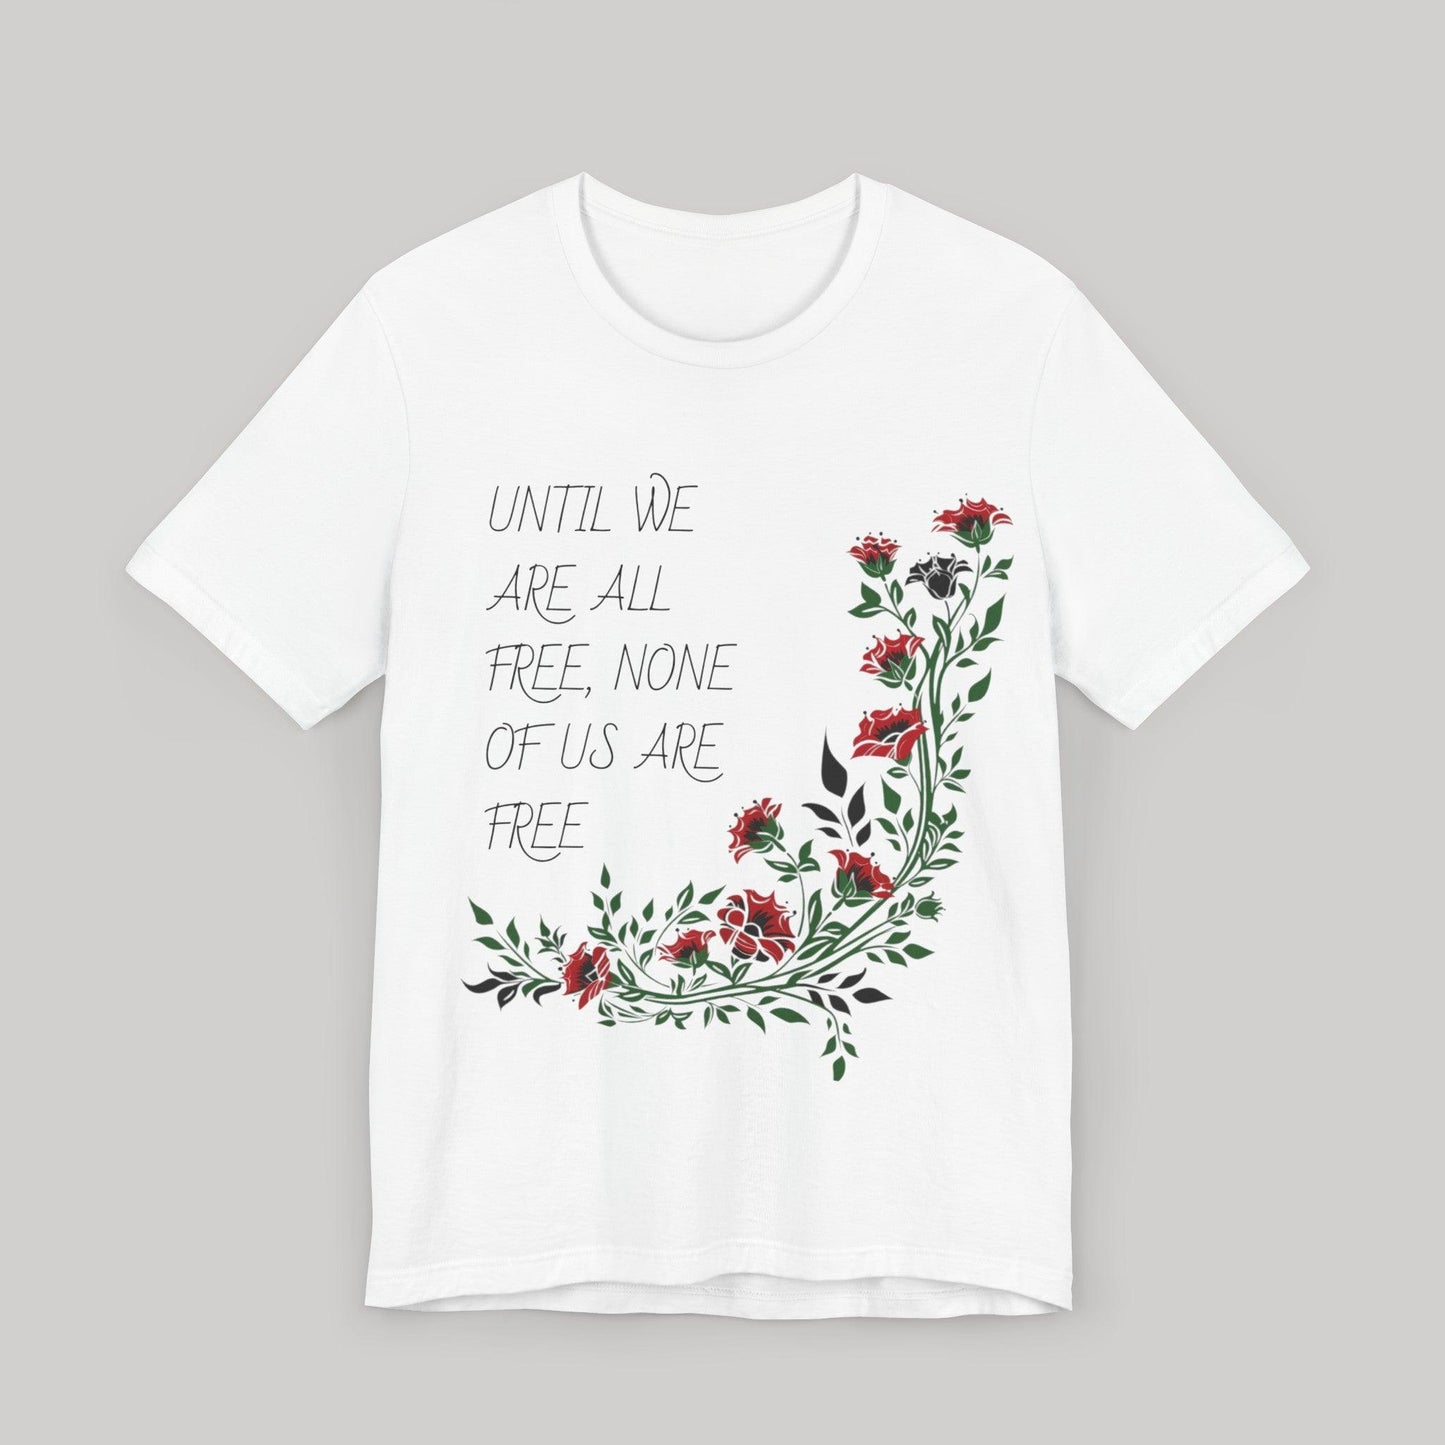 Until we are all free, none of us are free Palestine T Shirt